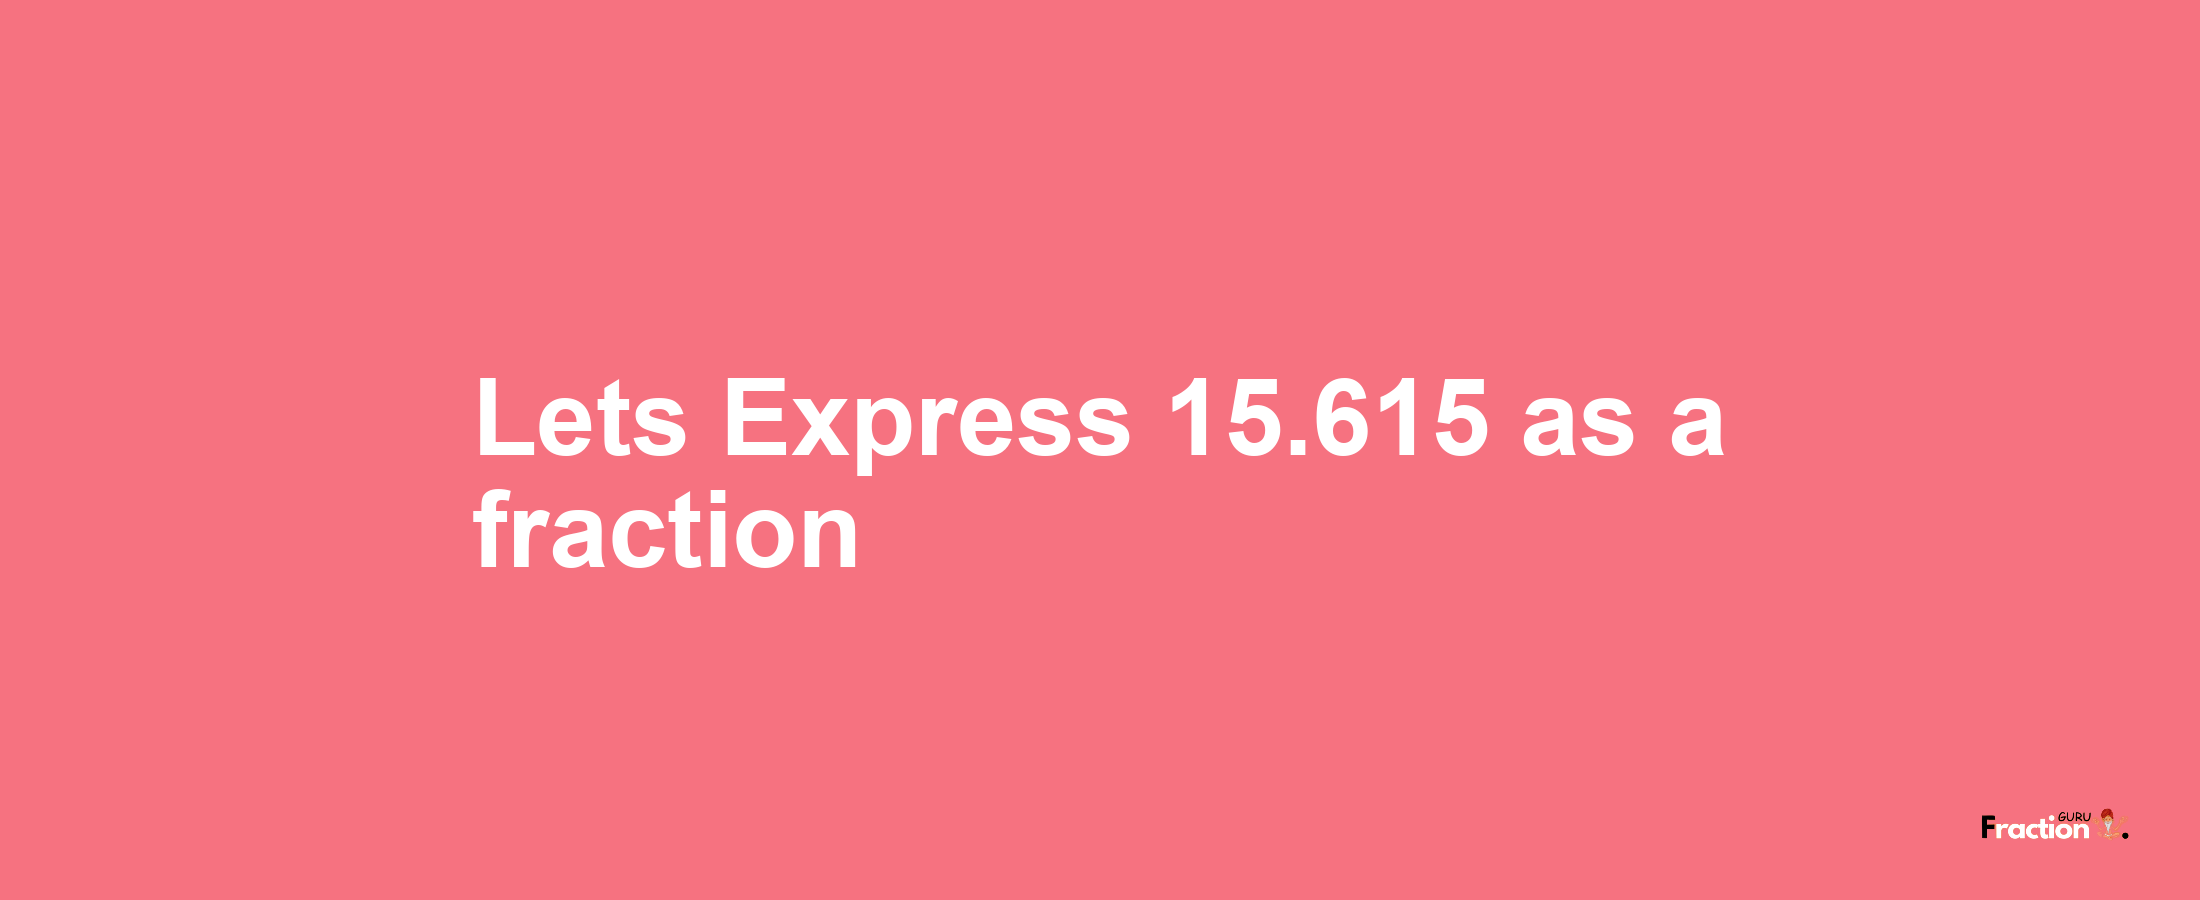 Lets Express 15.615 as afraction